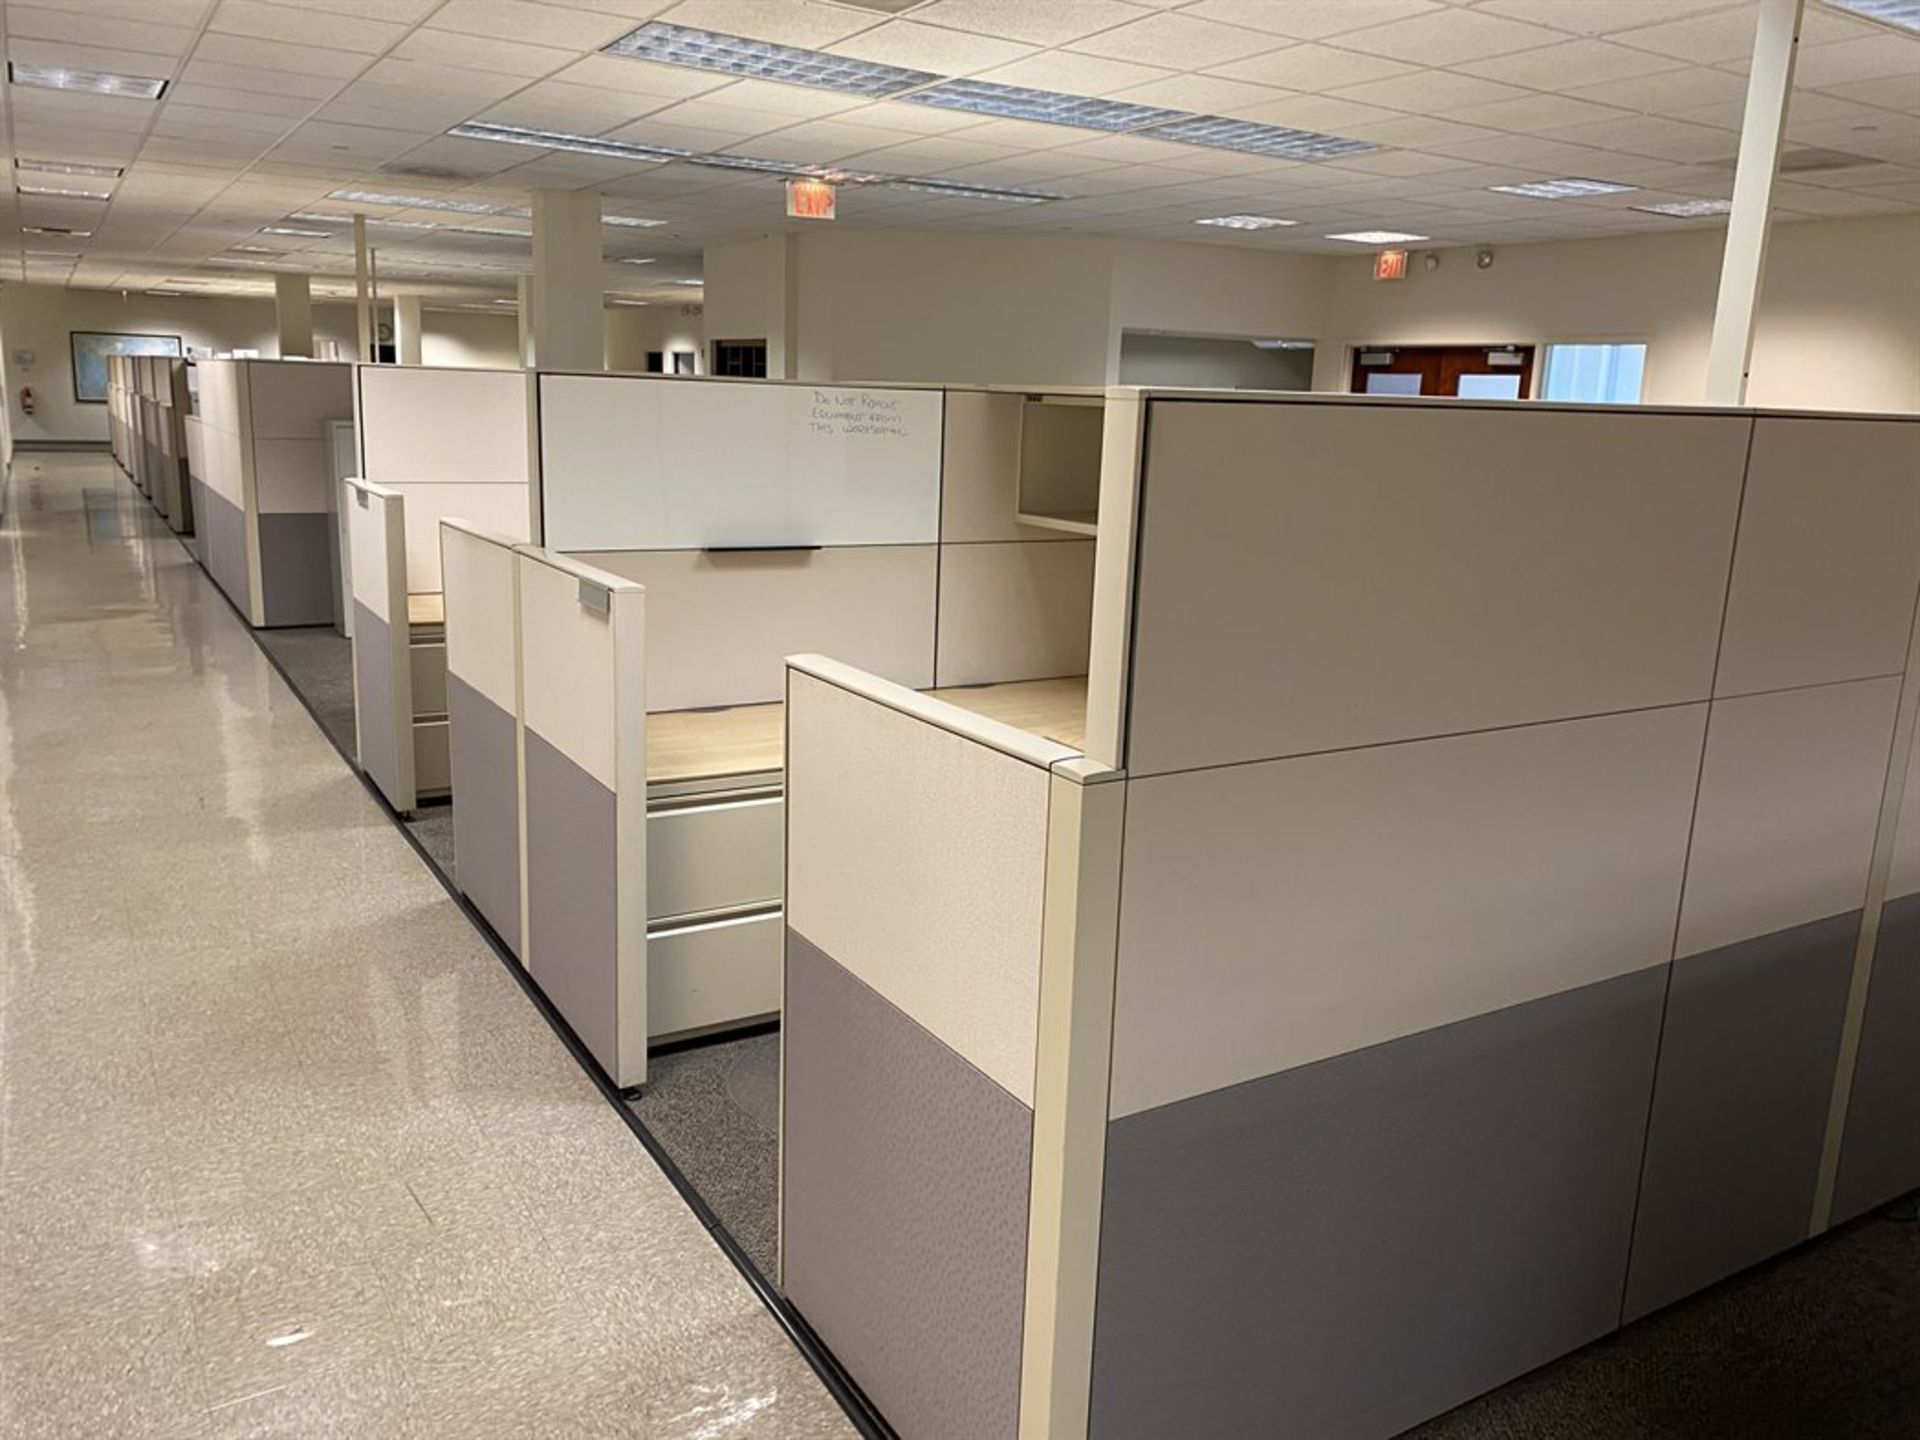 Approximately 40 Office Cubicles - Image 7 of 7